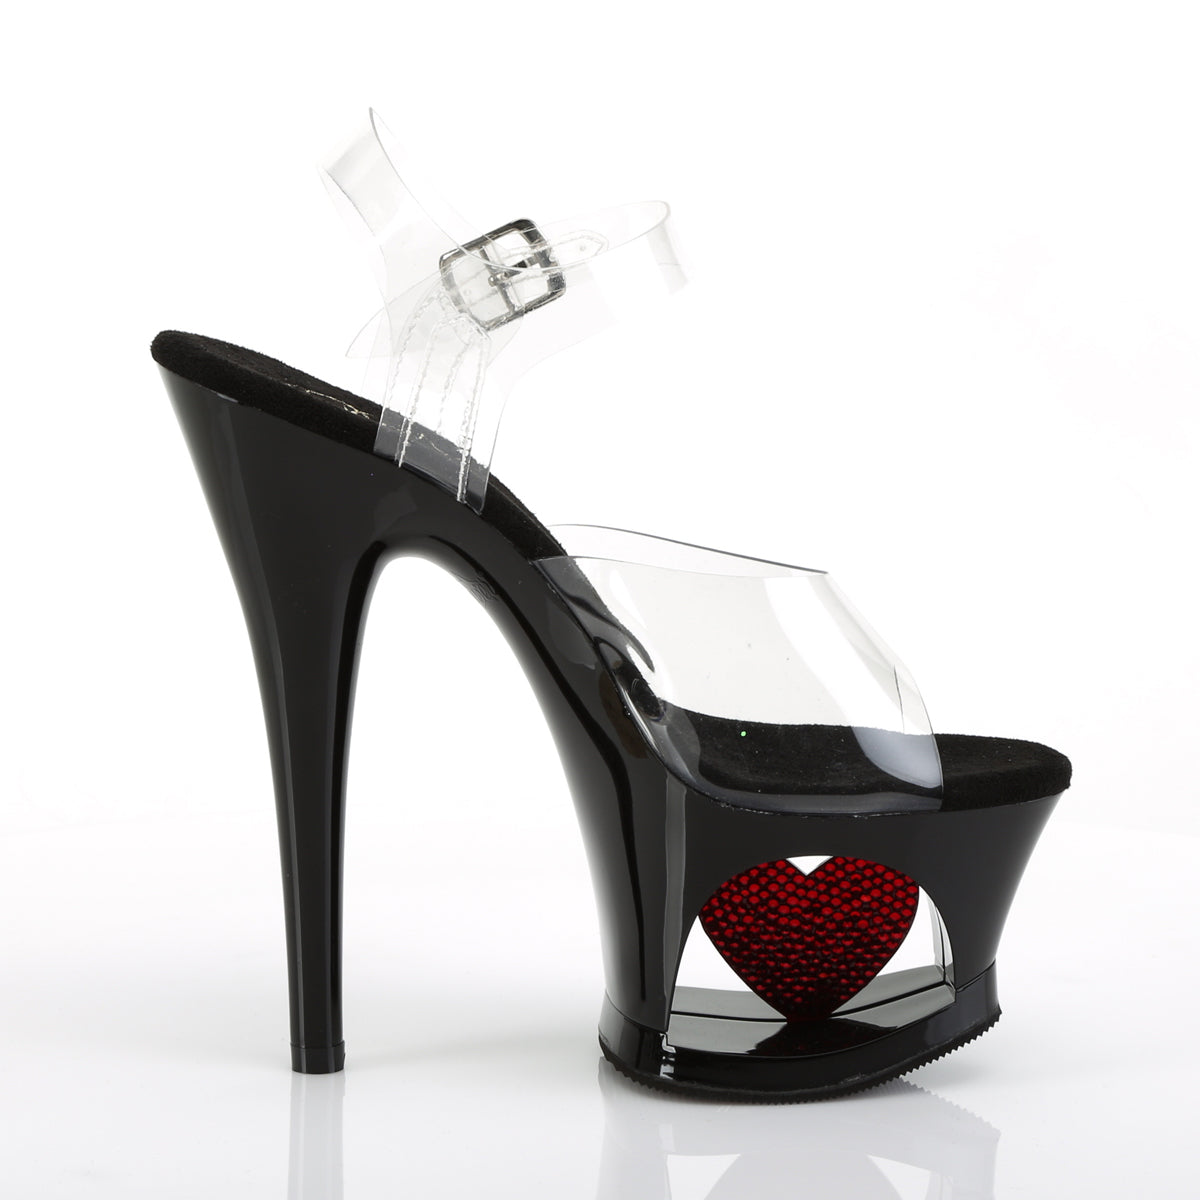 MOON-708HRS 7" Heel ClearBlack with Red Pole Dancing Shoes-Pleaser- Sexy Shoes Fetish Heels